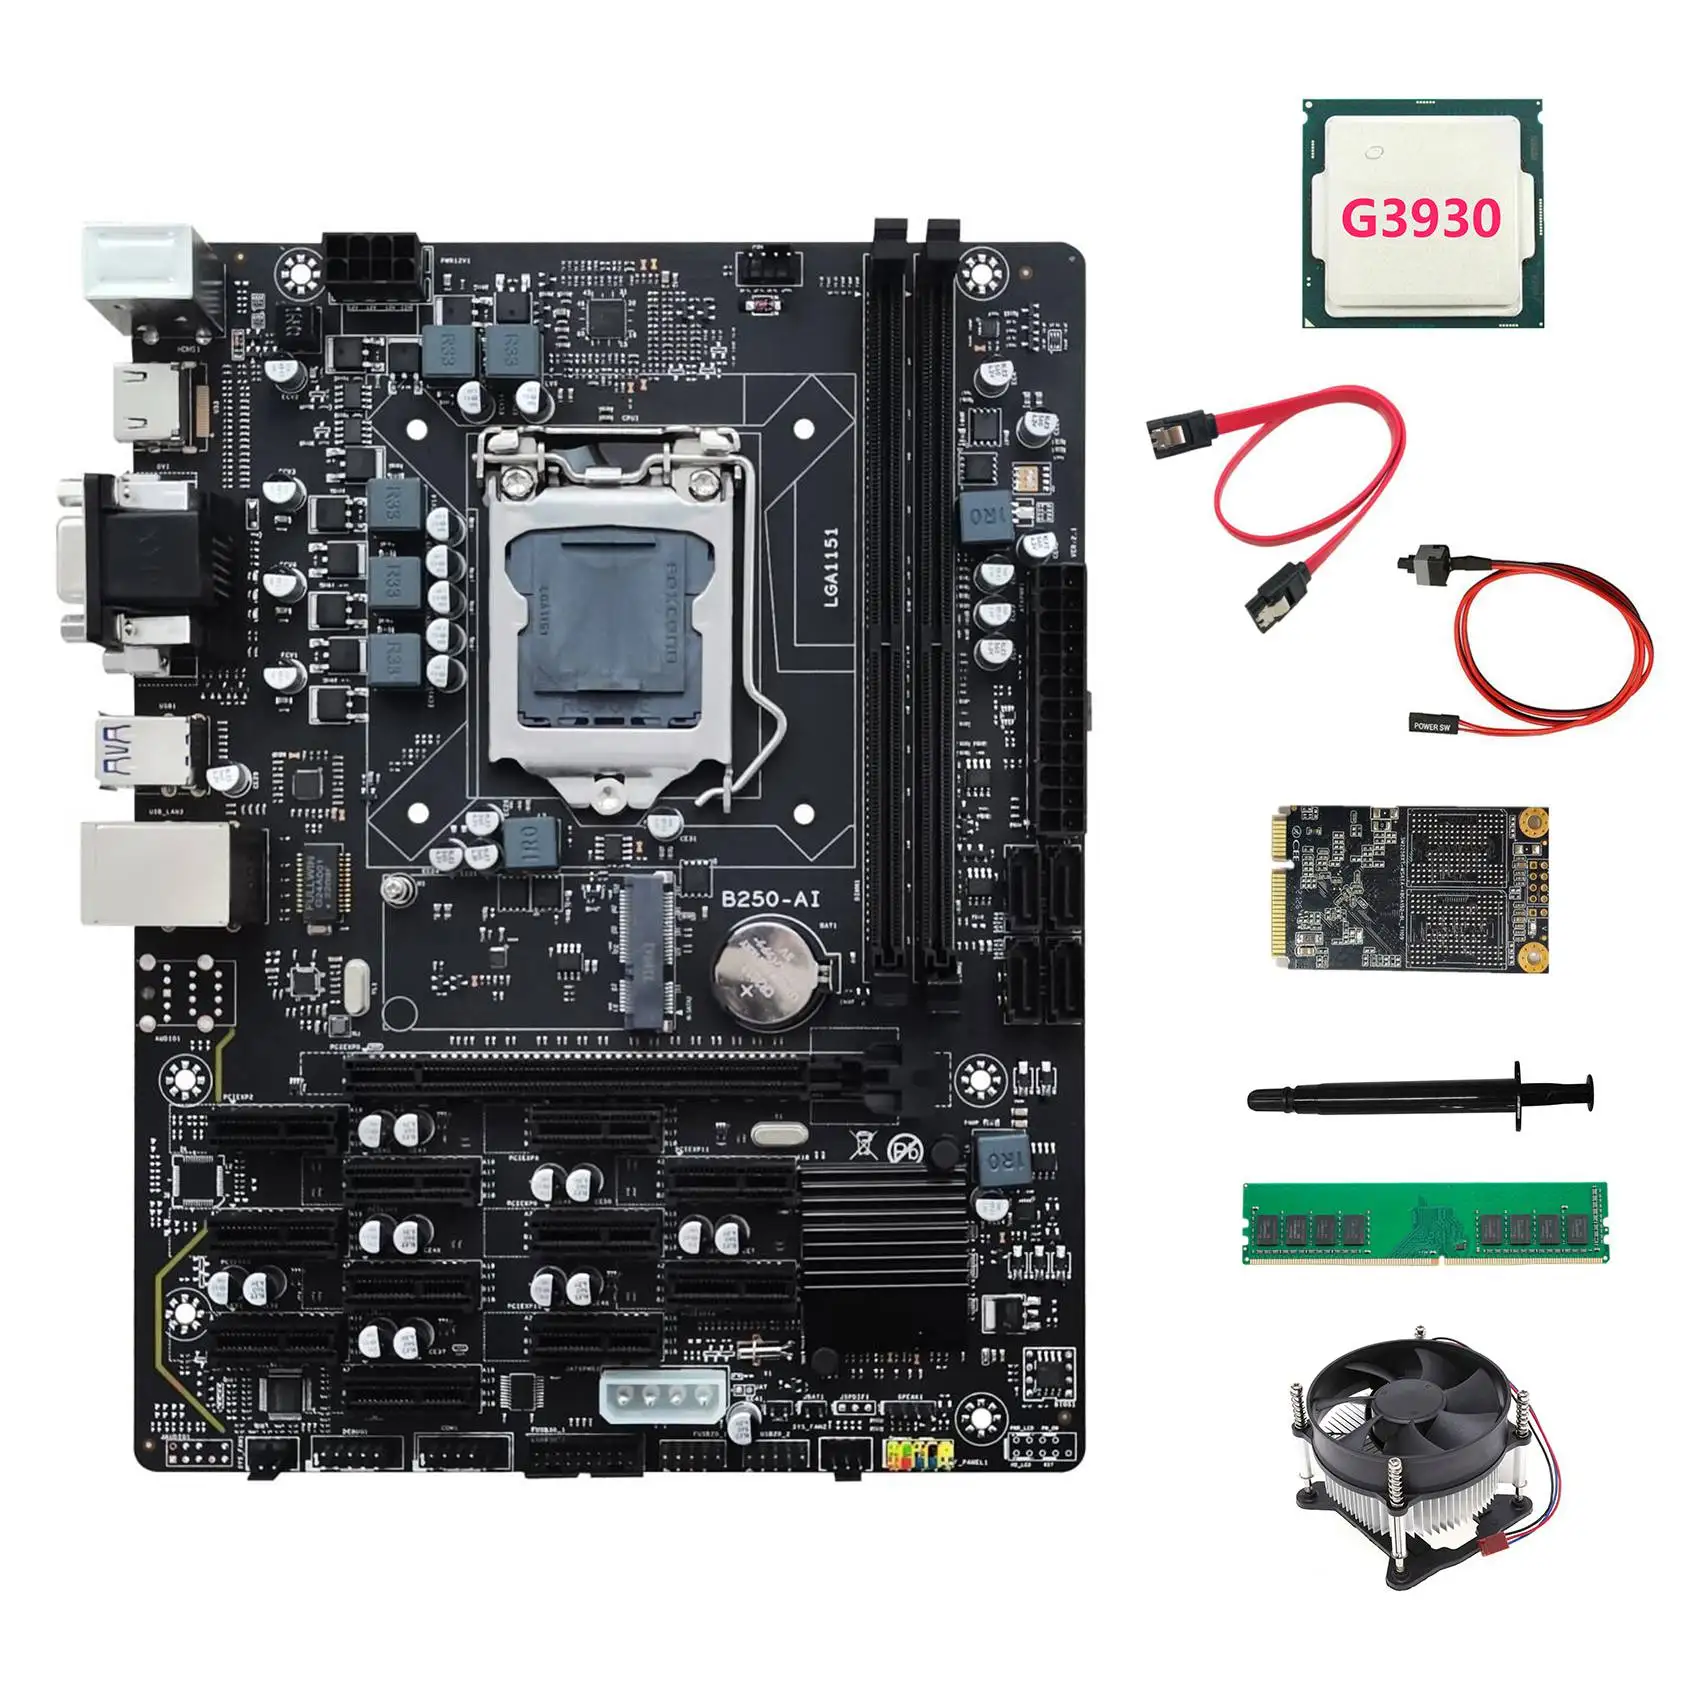 

B250 V2.1 ETH Miner Motherboard 12PCIE+G3930 CPU+DDR4 4GB RAM+128G MSATA SSD+Fan+SATA Cable+Switch Cable+Thermal Grease